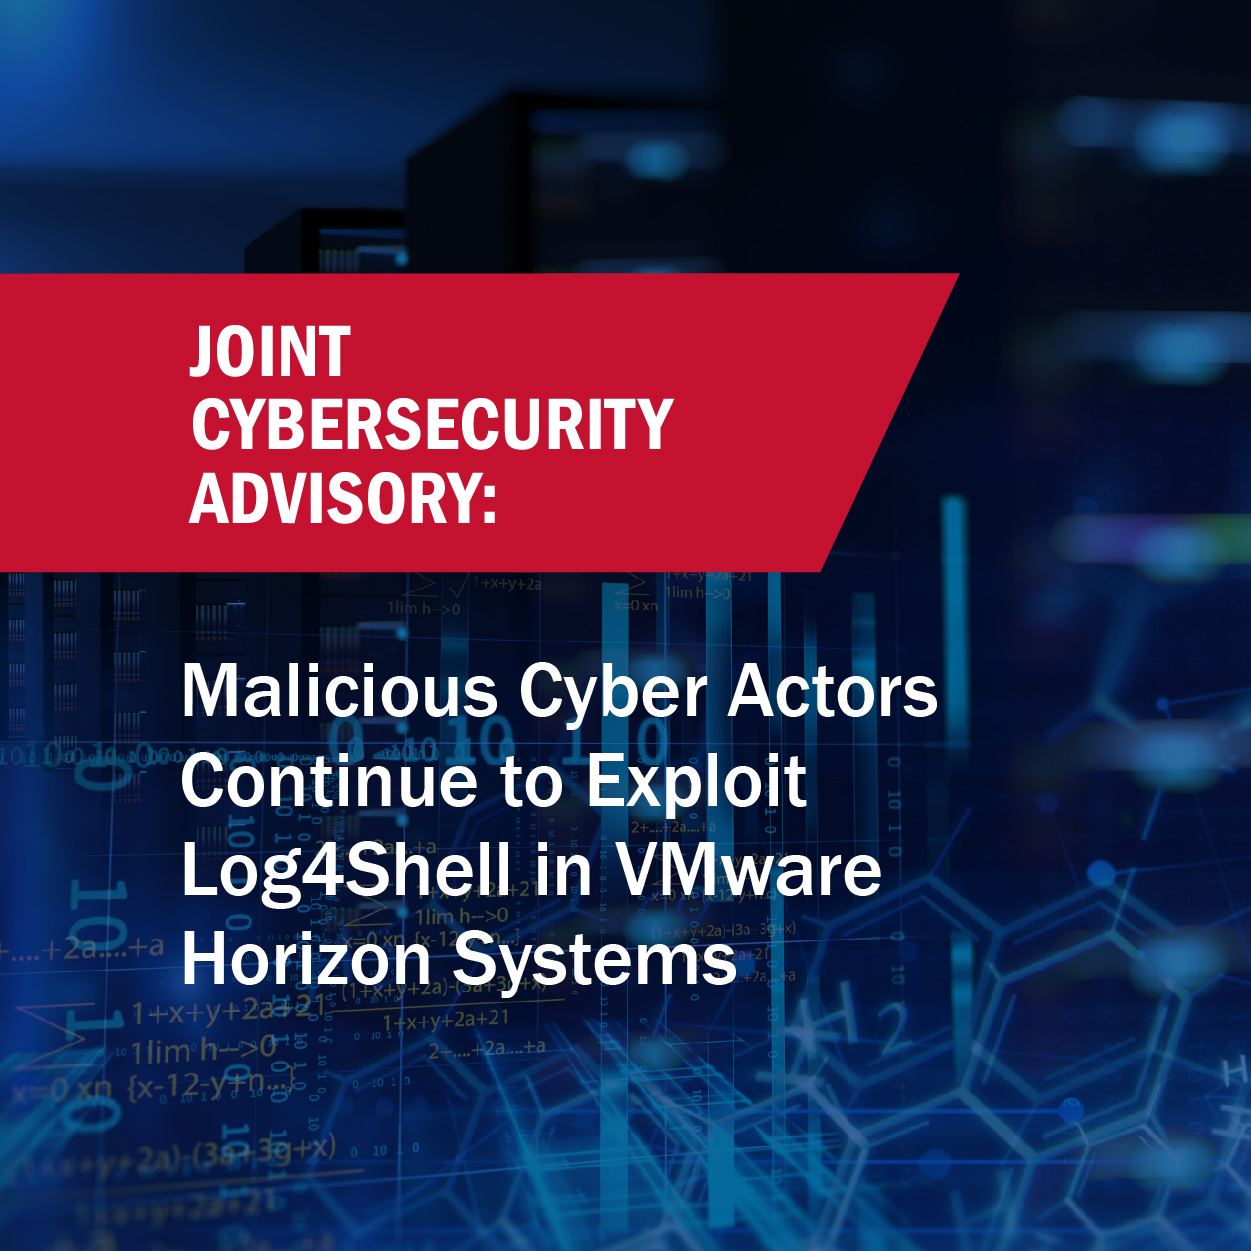 Joint Cybersecurity Advisory: Malicious Cyber Actors Continue to Exploit Log4Shell in VMware Horizon Systems